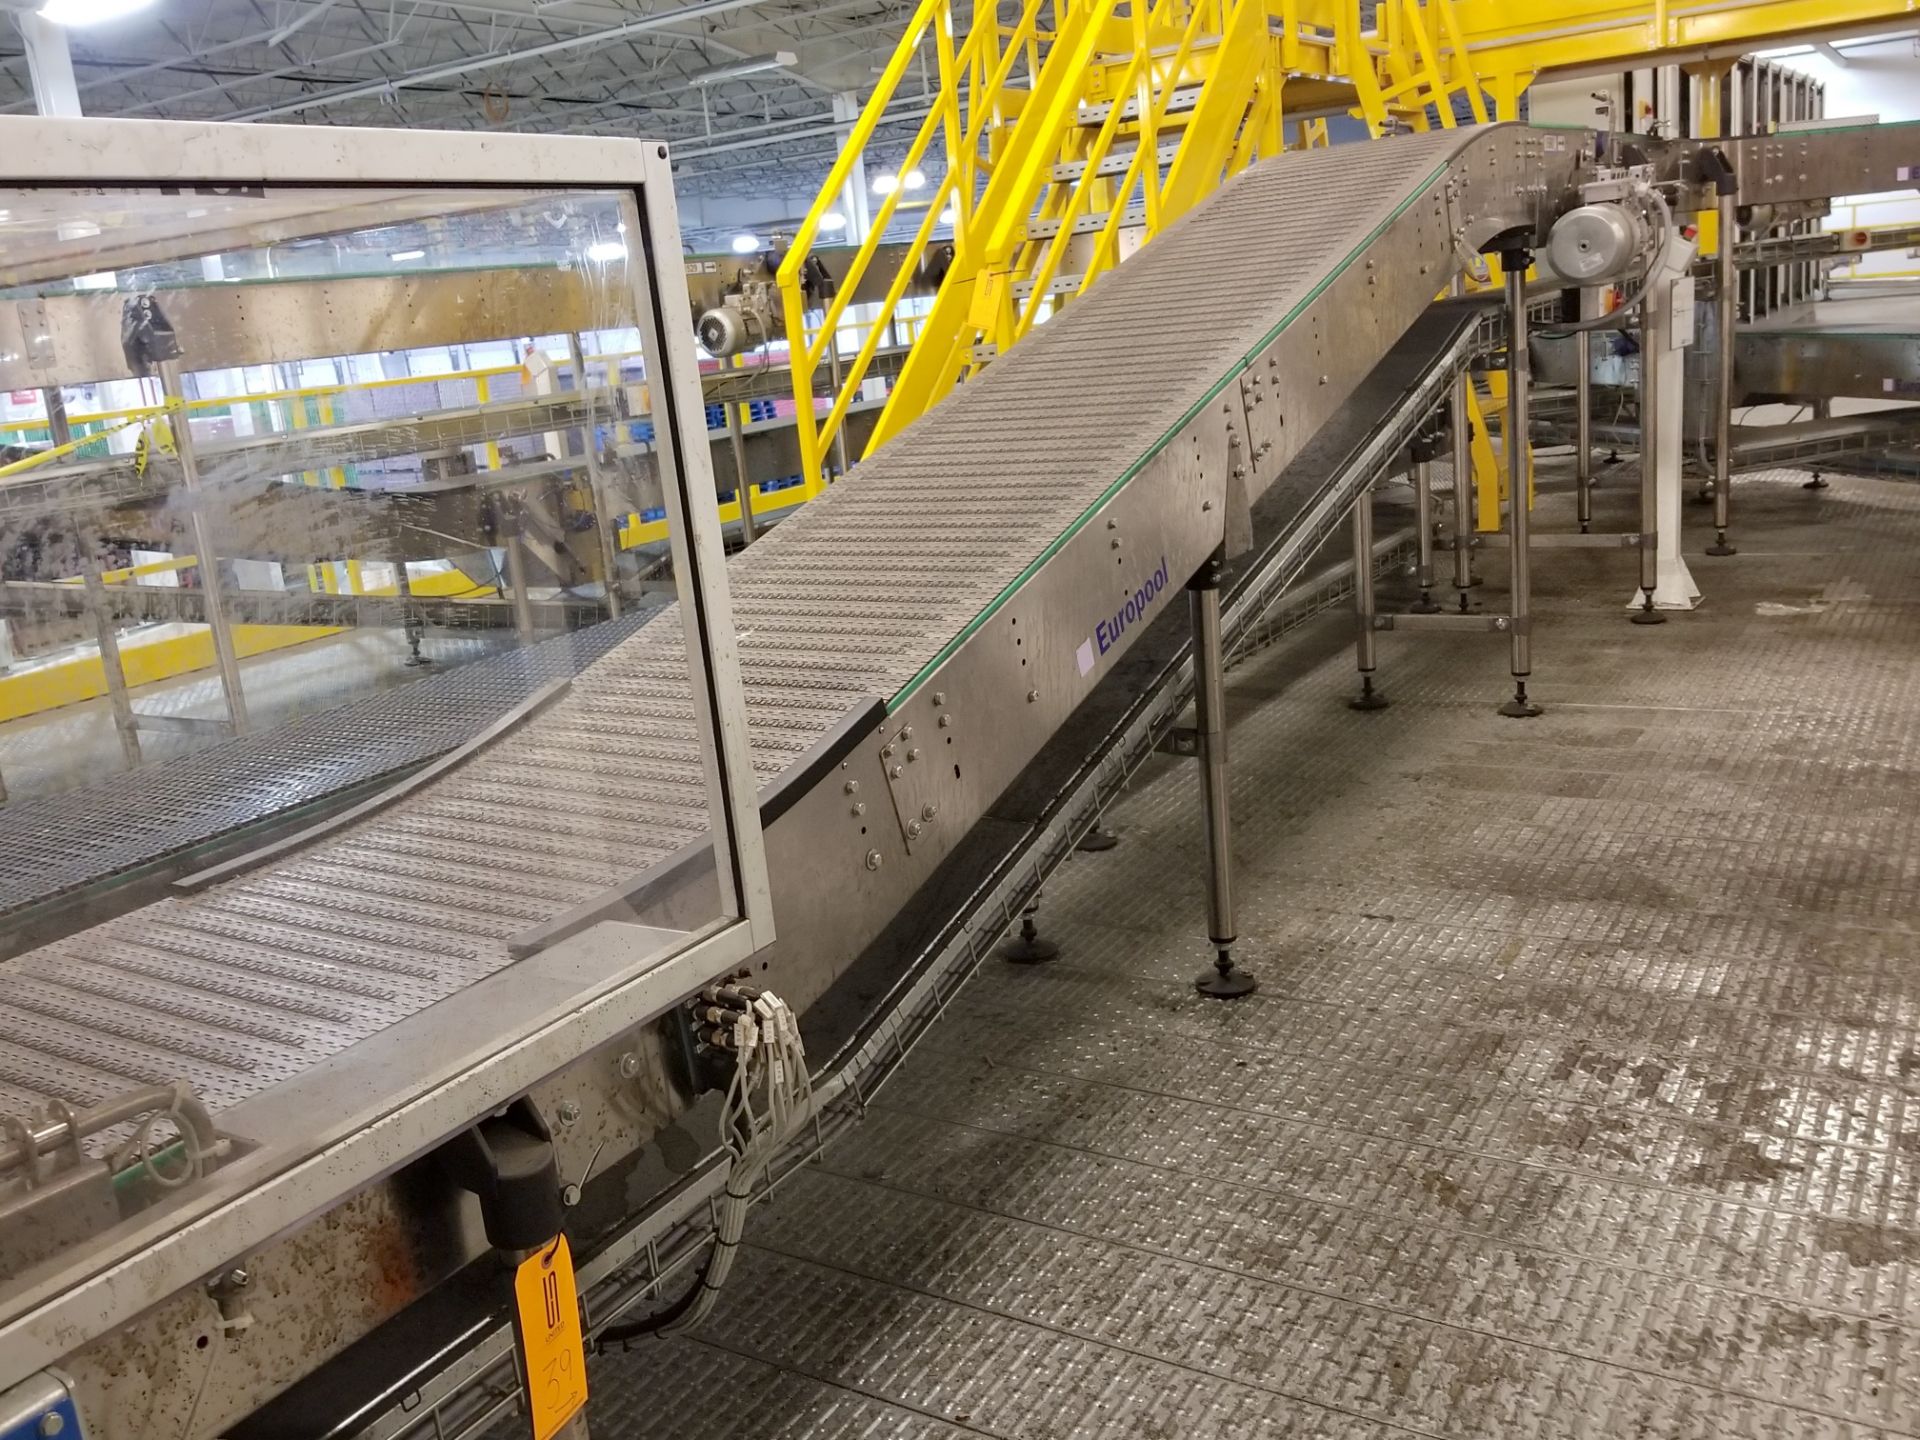 Approx. 40 feet of Europool Case Conveyor - Discharge of Case Switch